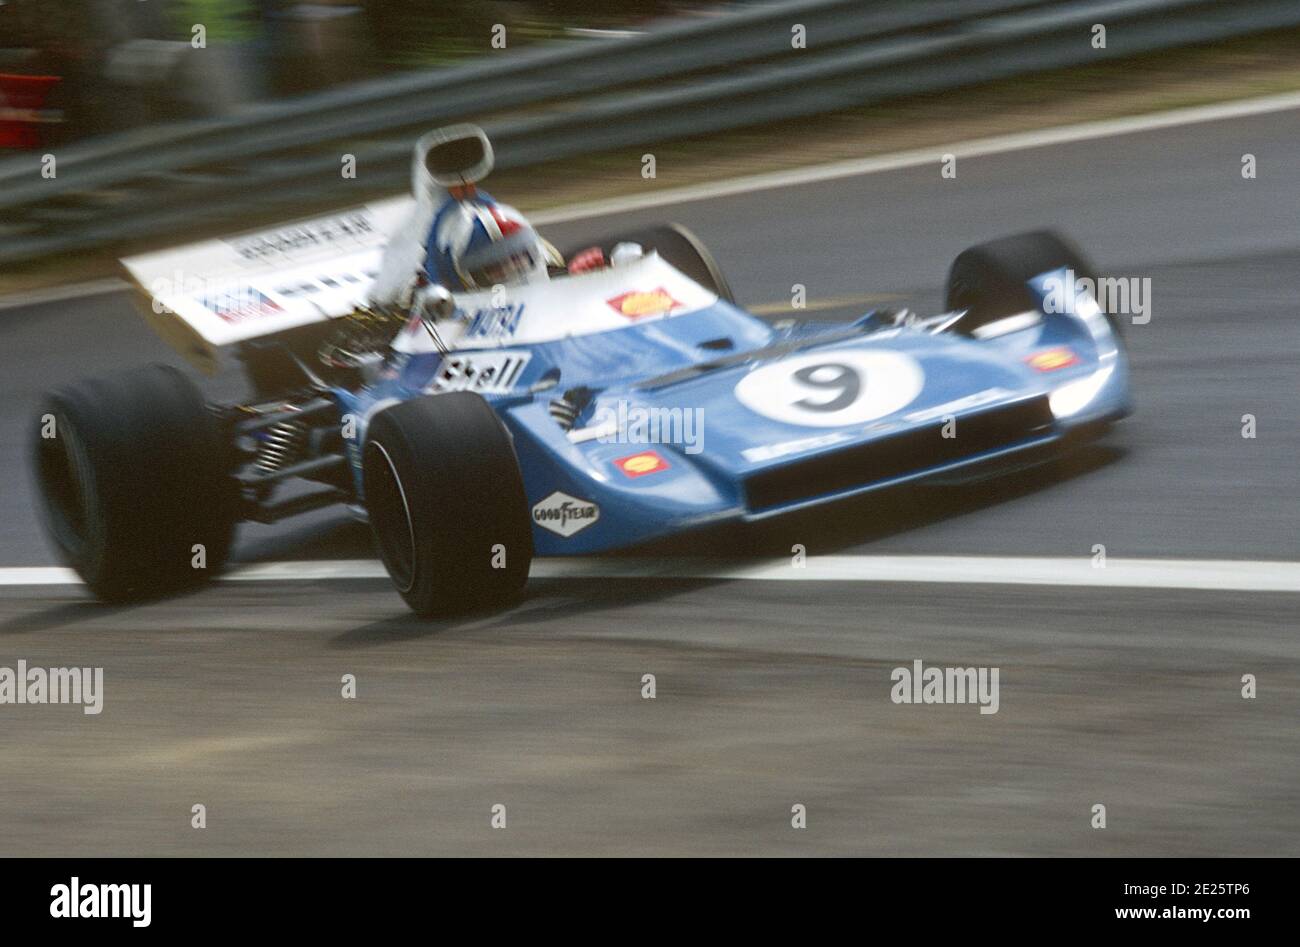 Chris AMON driving Matra F1 car in full speed during 1972 Grand Prix de France, in Charade circuit near Clermont-Ferrand. Stock Photo